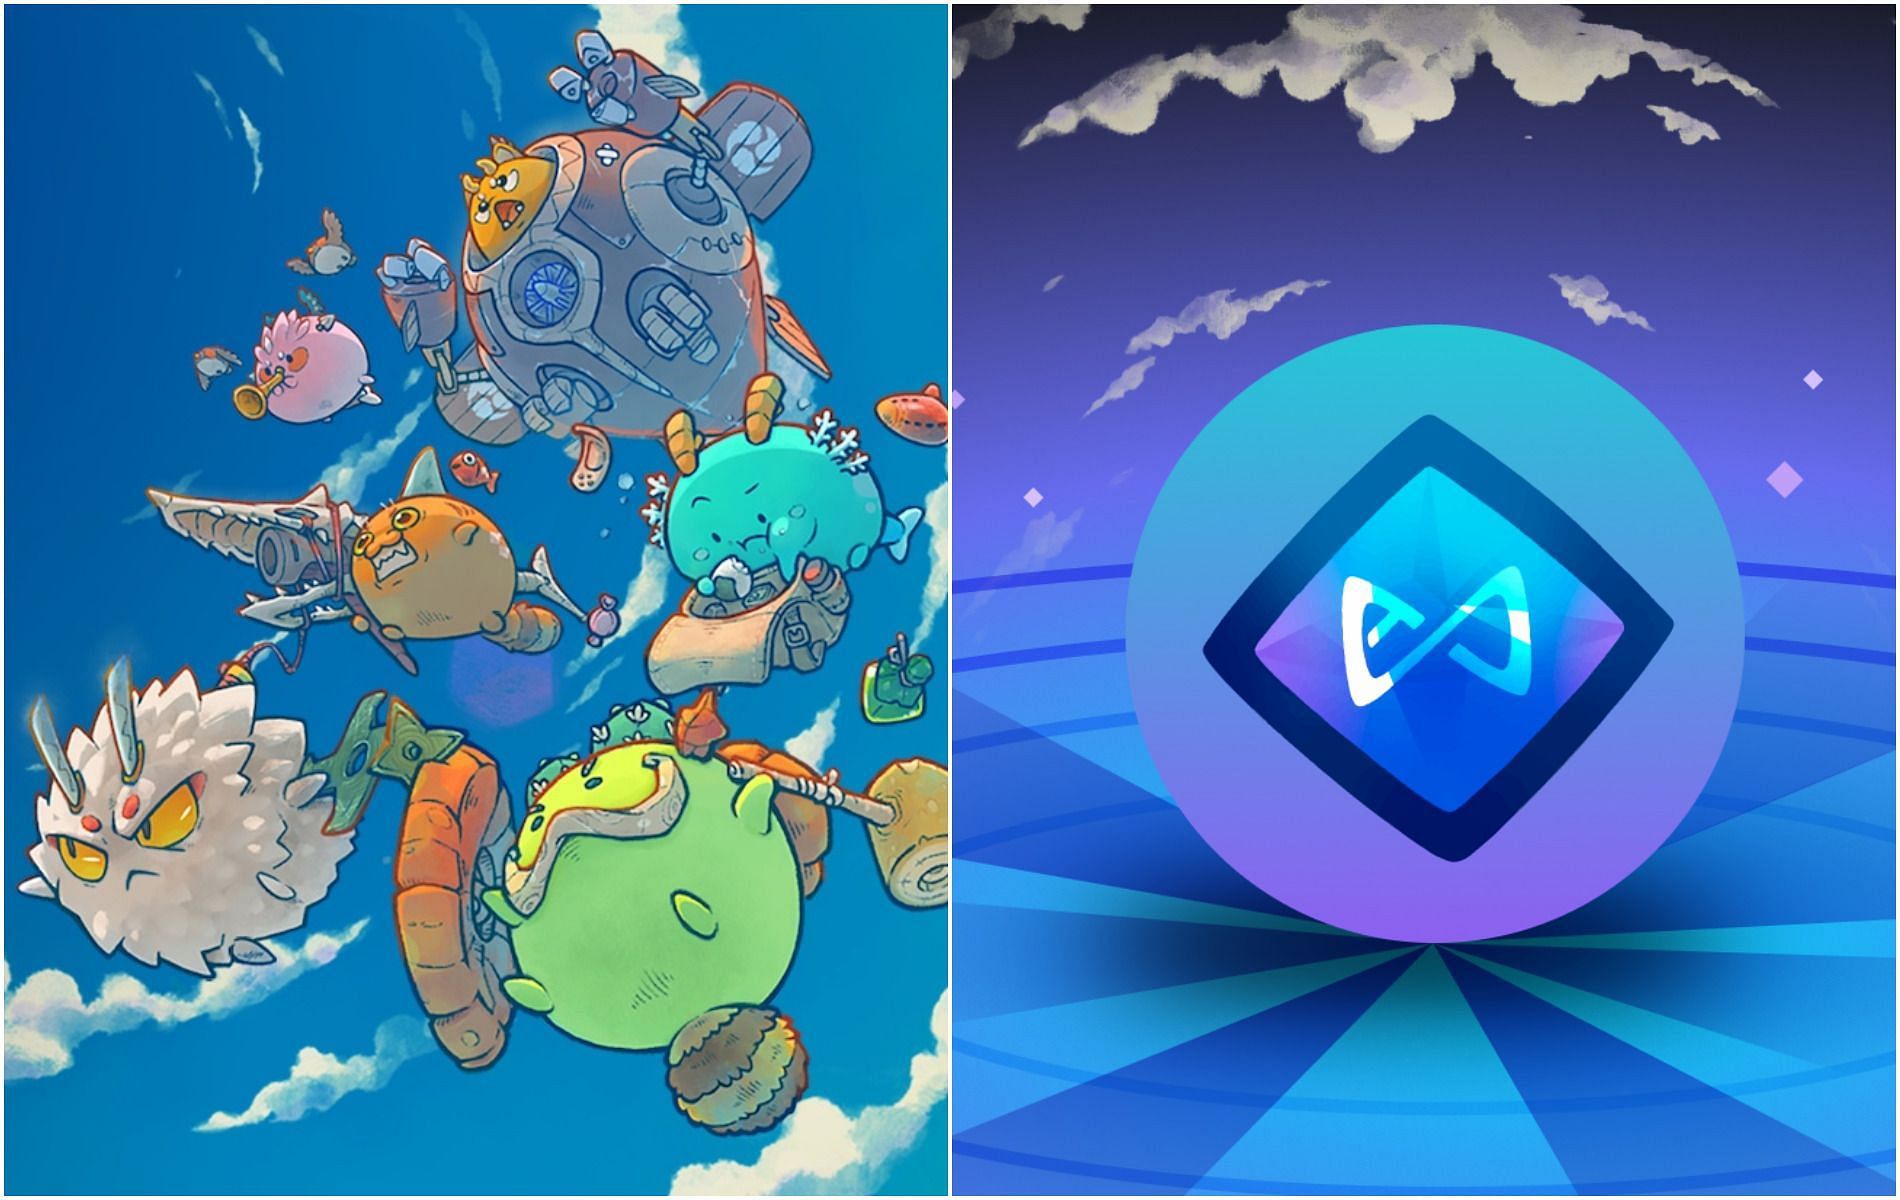 Axie Infinity has risen to become one of the most popular NFT games out right now (Images vis Sky Marvis)